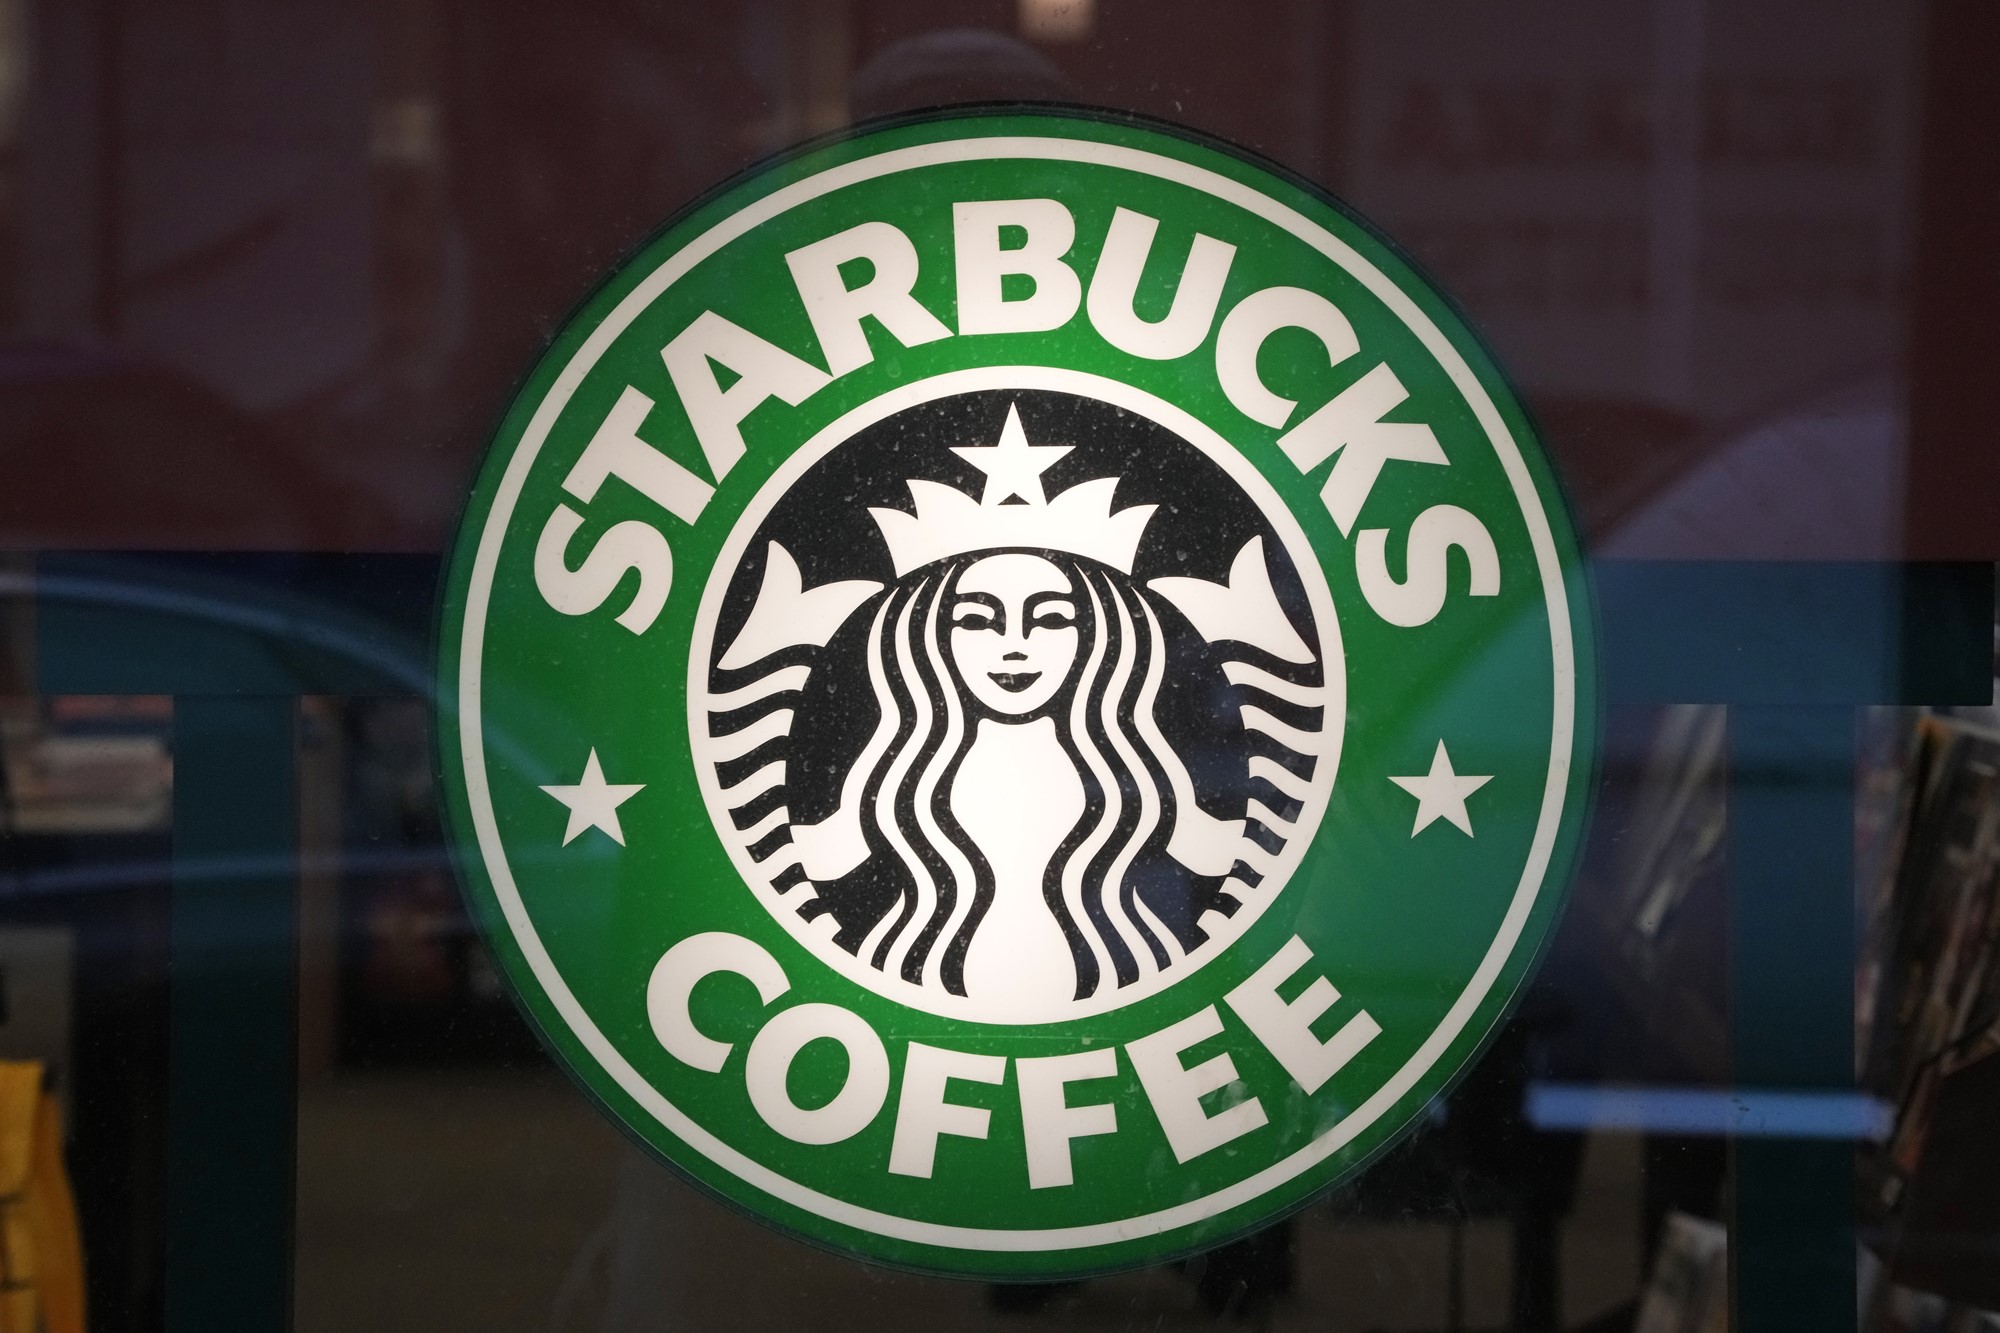 The starbucks logo which has a mermaid inside a green circle with the words starbucks coffee written on it,  on a glass window.